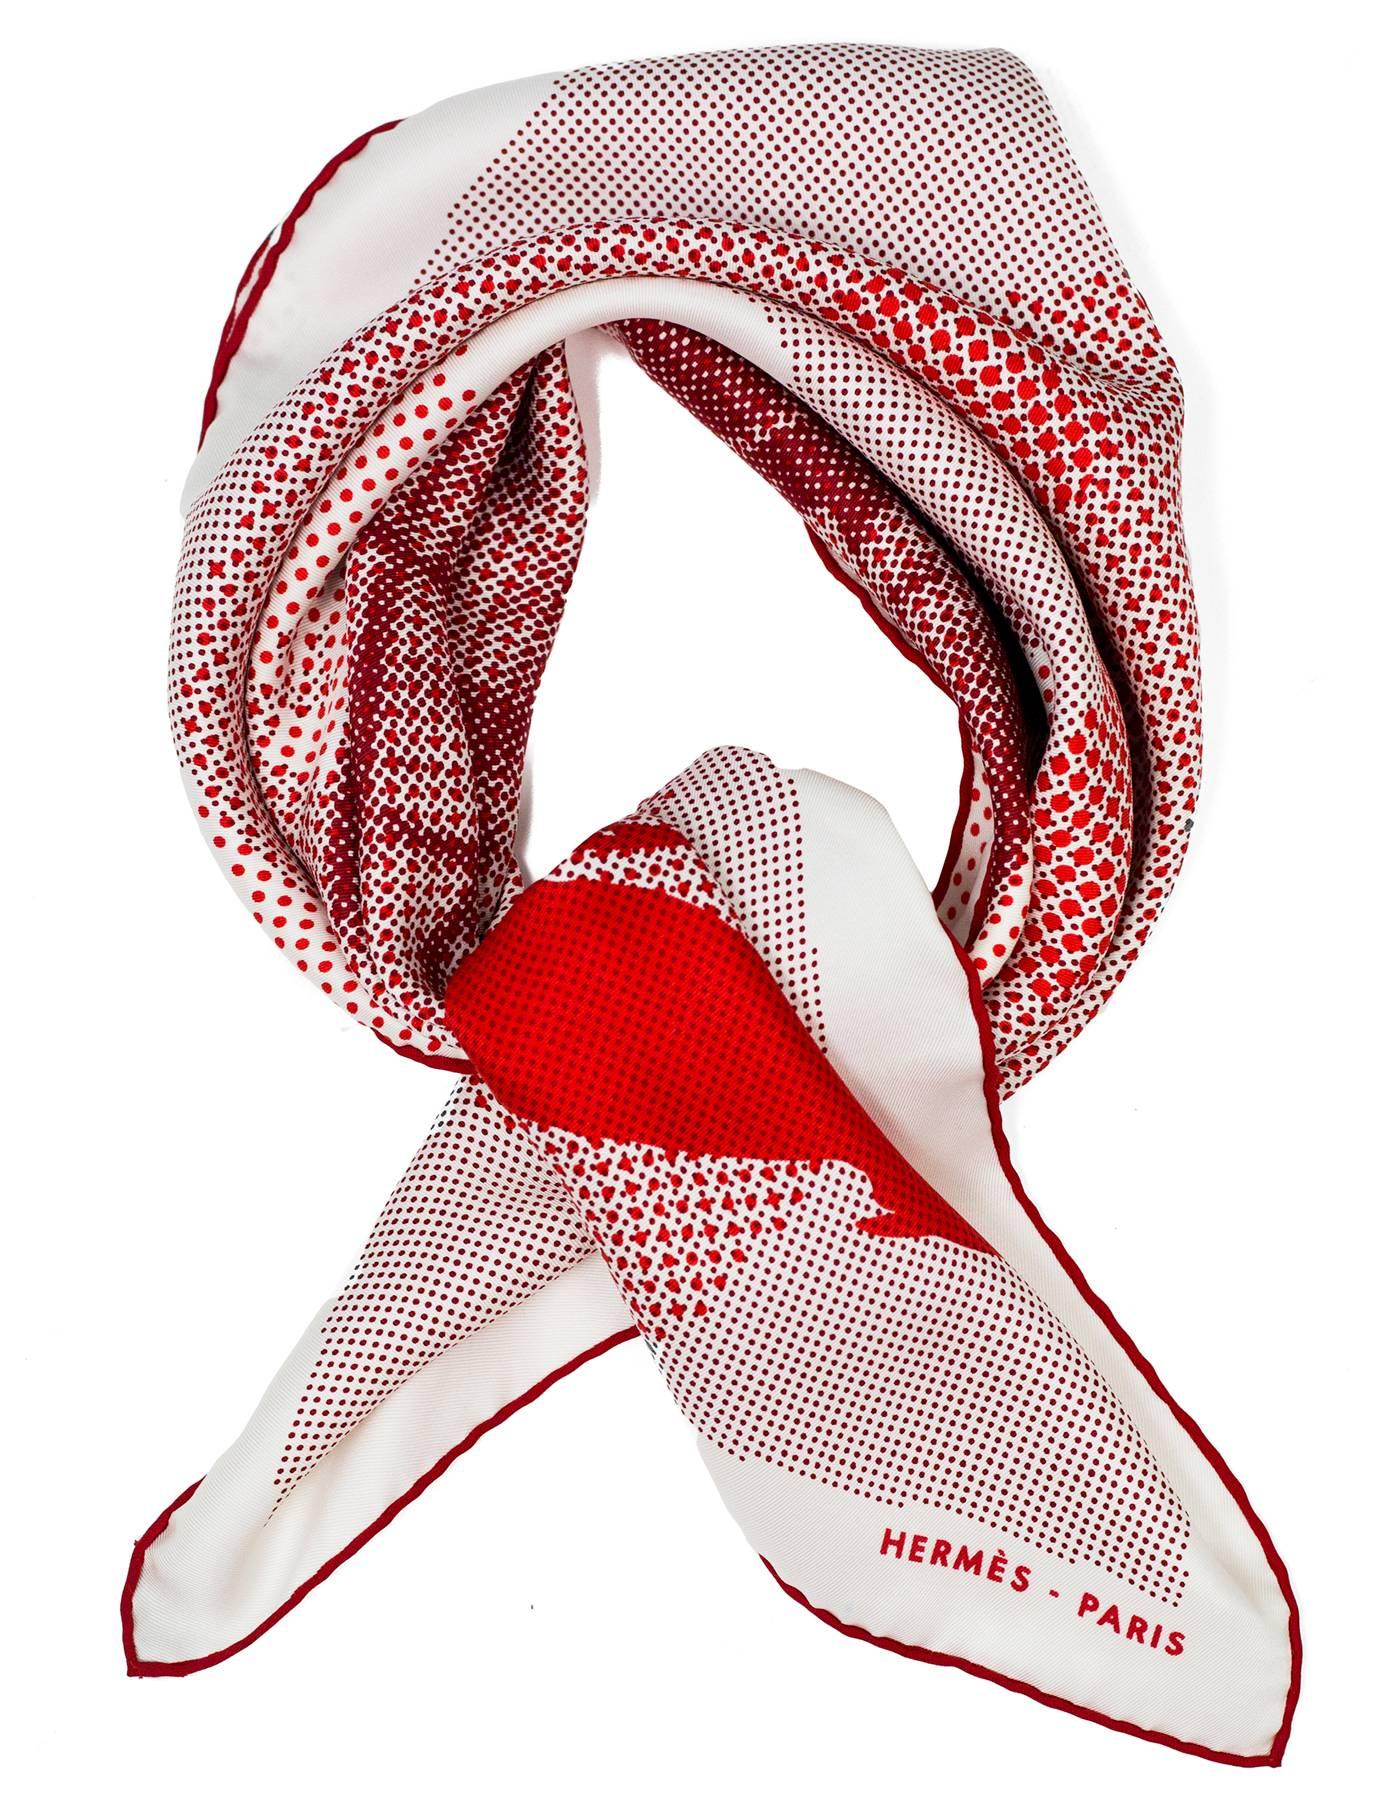 Hermes Red & White Fantaisie a Cheval Silk 70cm Scarf

Made In: France
Color: Red, white
Composition: 100% Silk
Retail Price: $300 + tax
Overall Condition: Very good pre-owned condition with the exception of some discoloration along